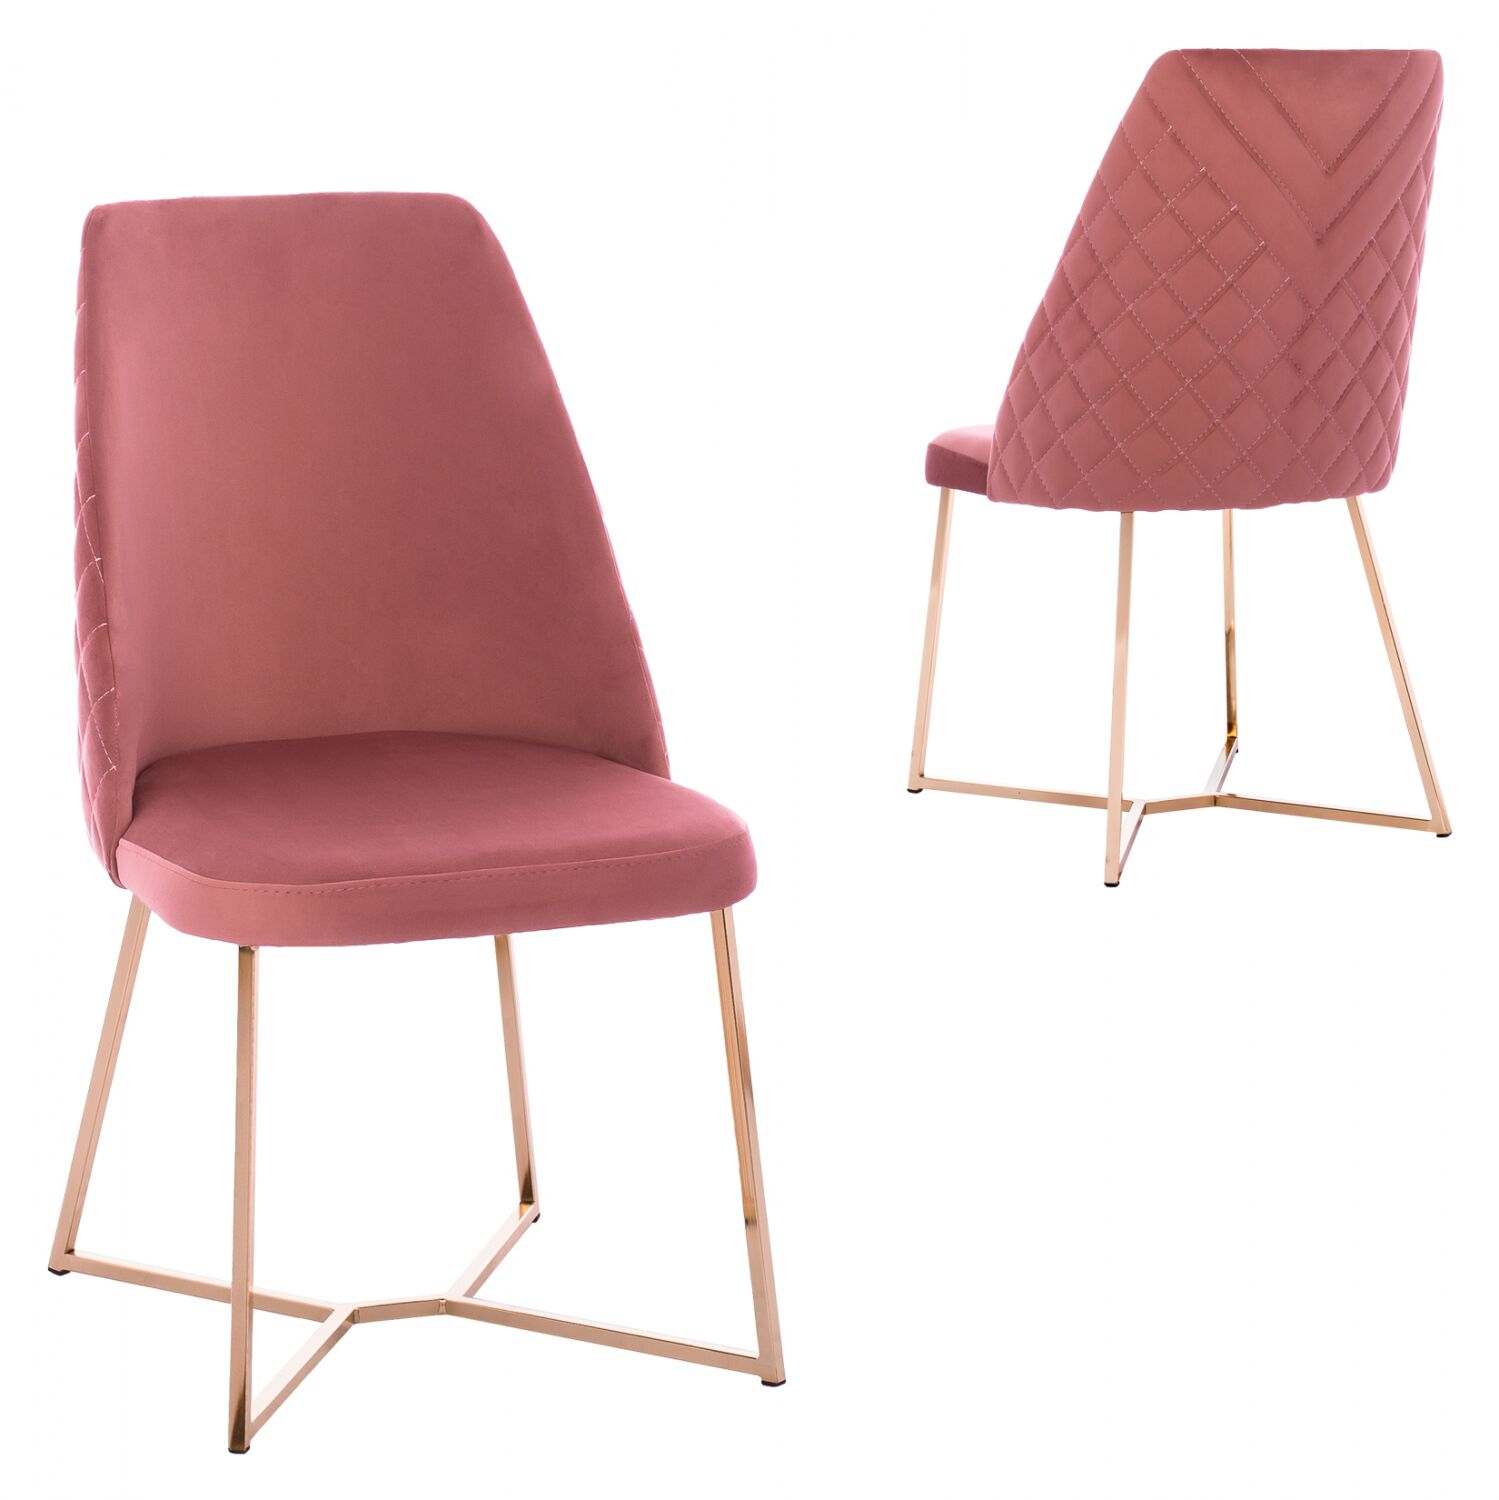 CHAIR “ROSALIND” HM9276.02 DUSTY PINK VELVET WITH METAL LEGS IN GOLD COLOR 49x62x93H CM.